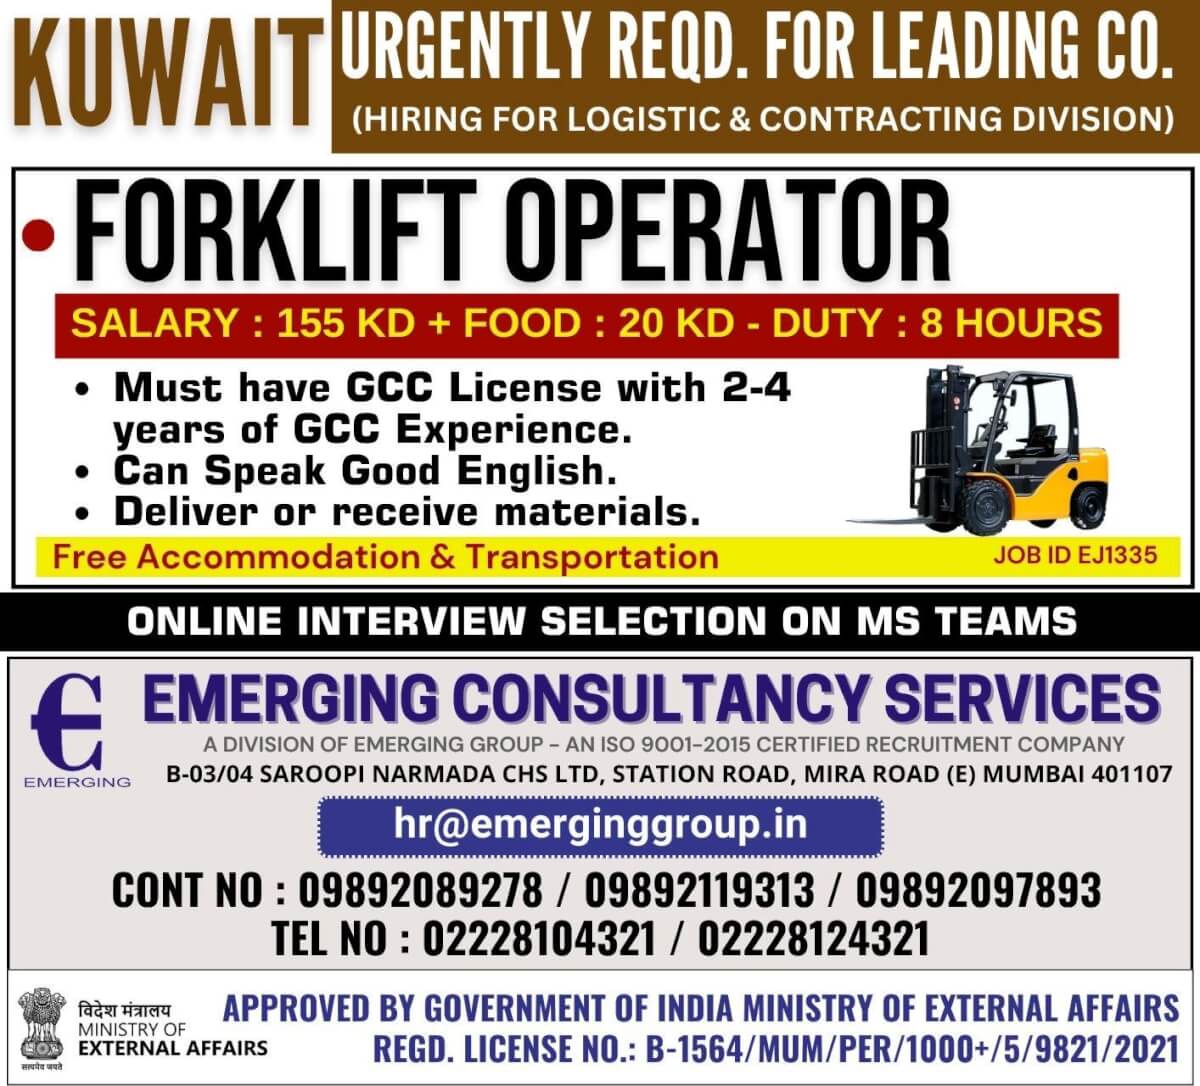 URGENTLY REQD. FOR LEADING CO. IN KUWAIT - HIRING FOR LOGISTIC & CONTRACTING DIVISION